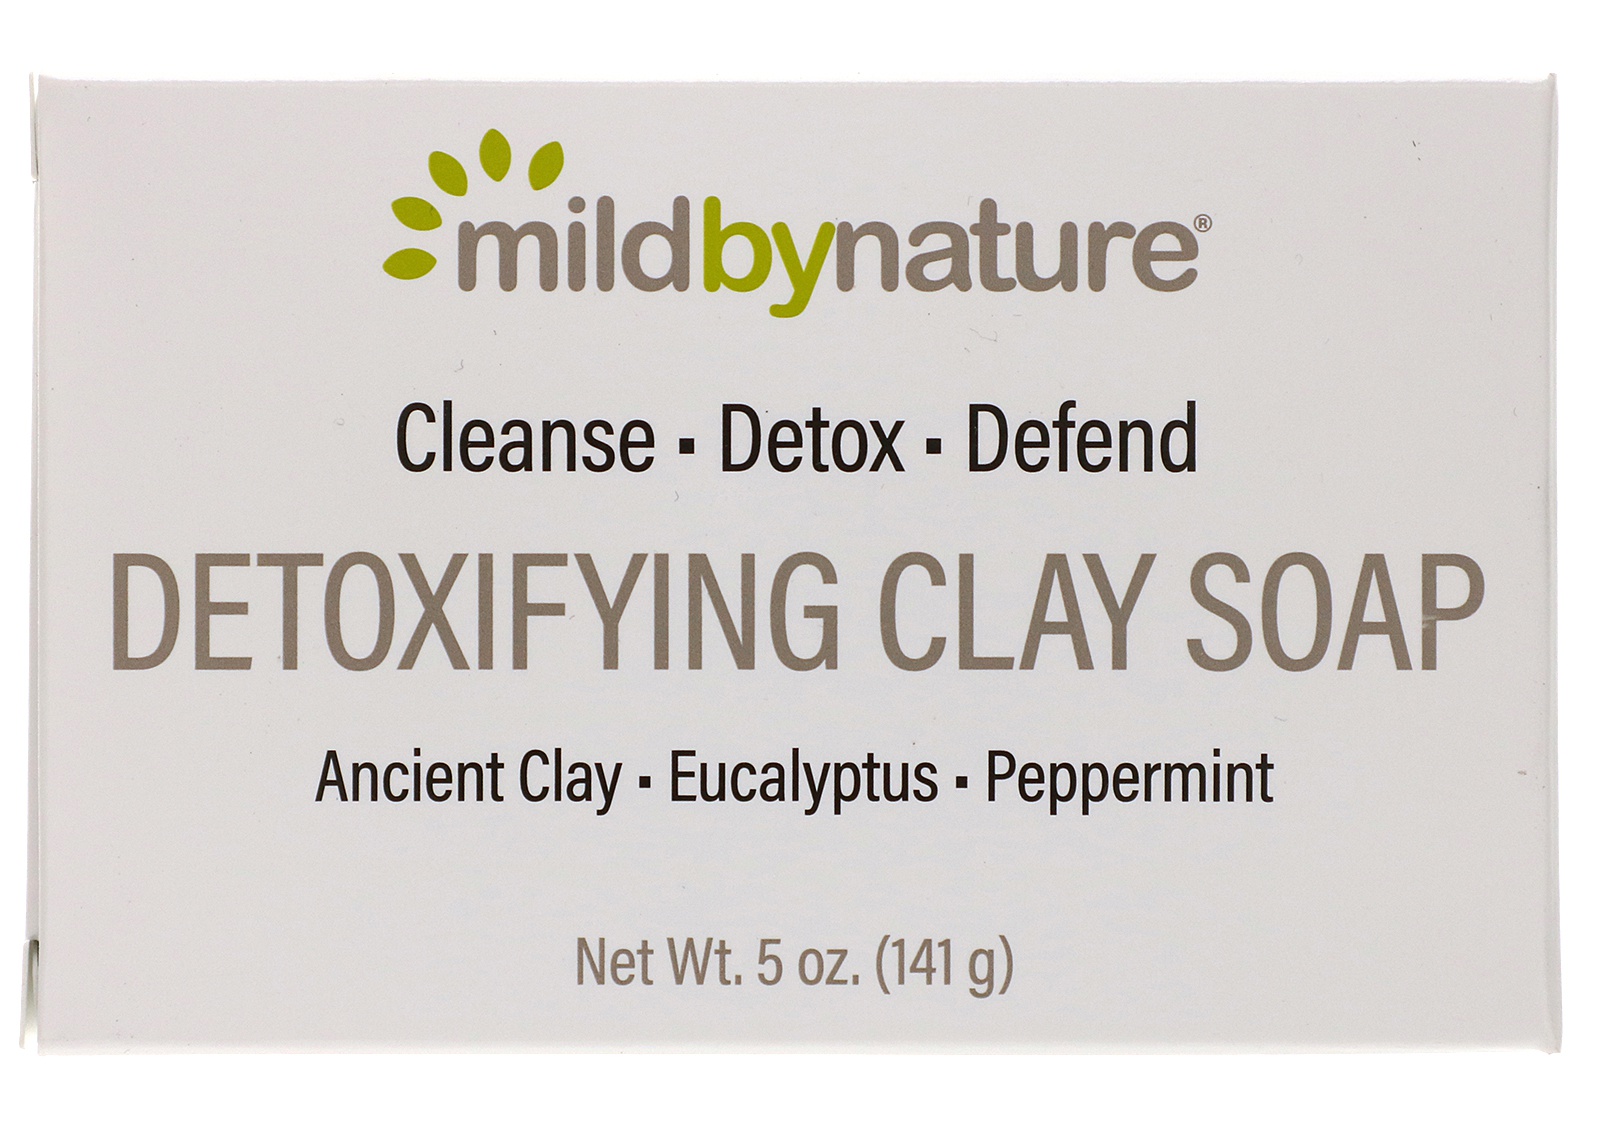 Mild By Natur Detoxifying Clay, Bar Soap, Eucalyptus & Peppermint, With Ancient Clay